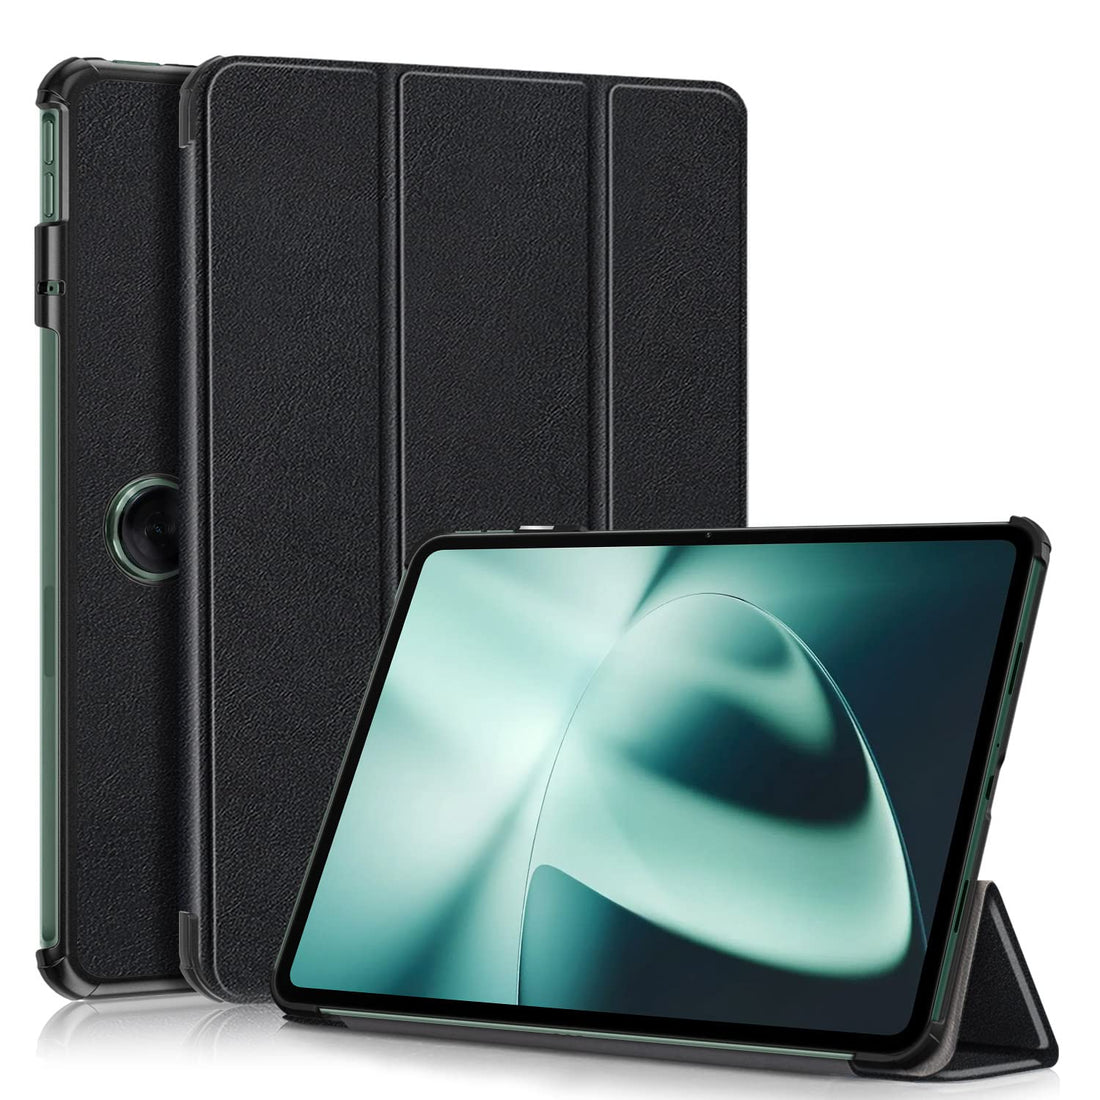 Gylint Case for OnePlus Pad 2023, Folding Folio Ultra-Thin PU Leather Stand Case Cover for OnePlus Pad/Oppo Pad 2 Black